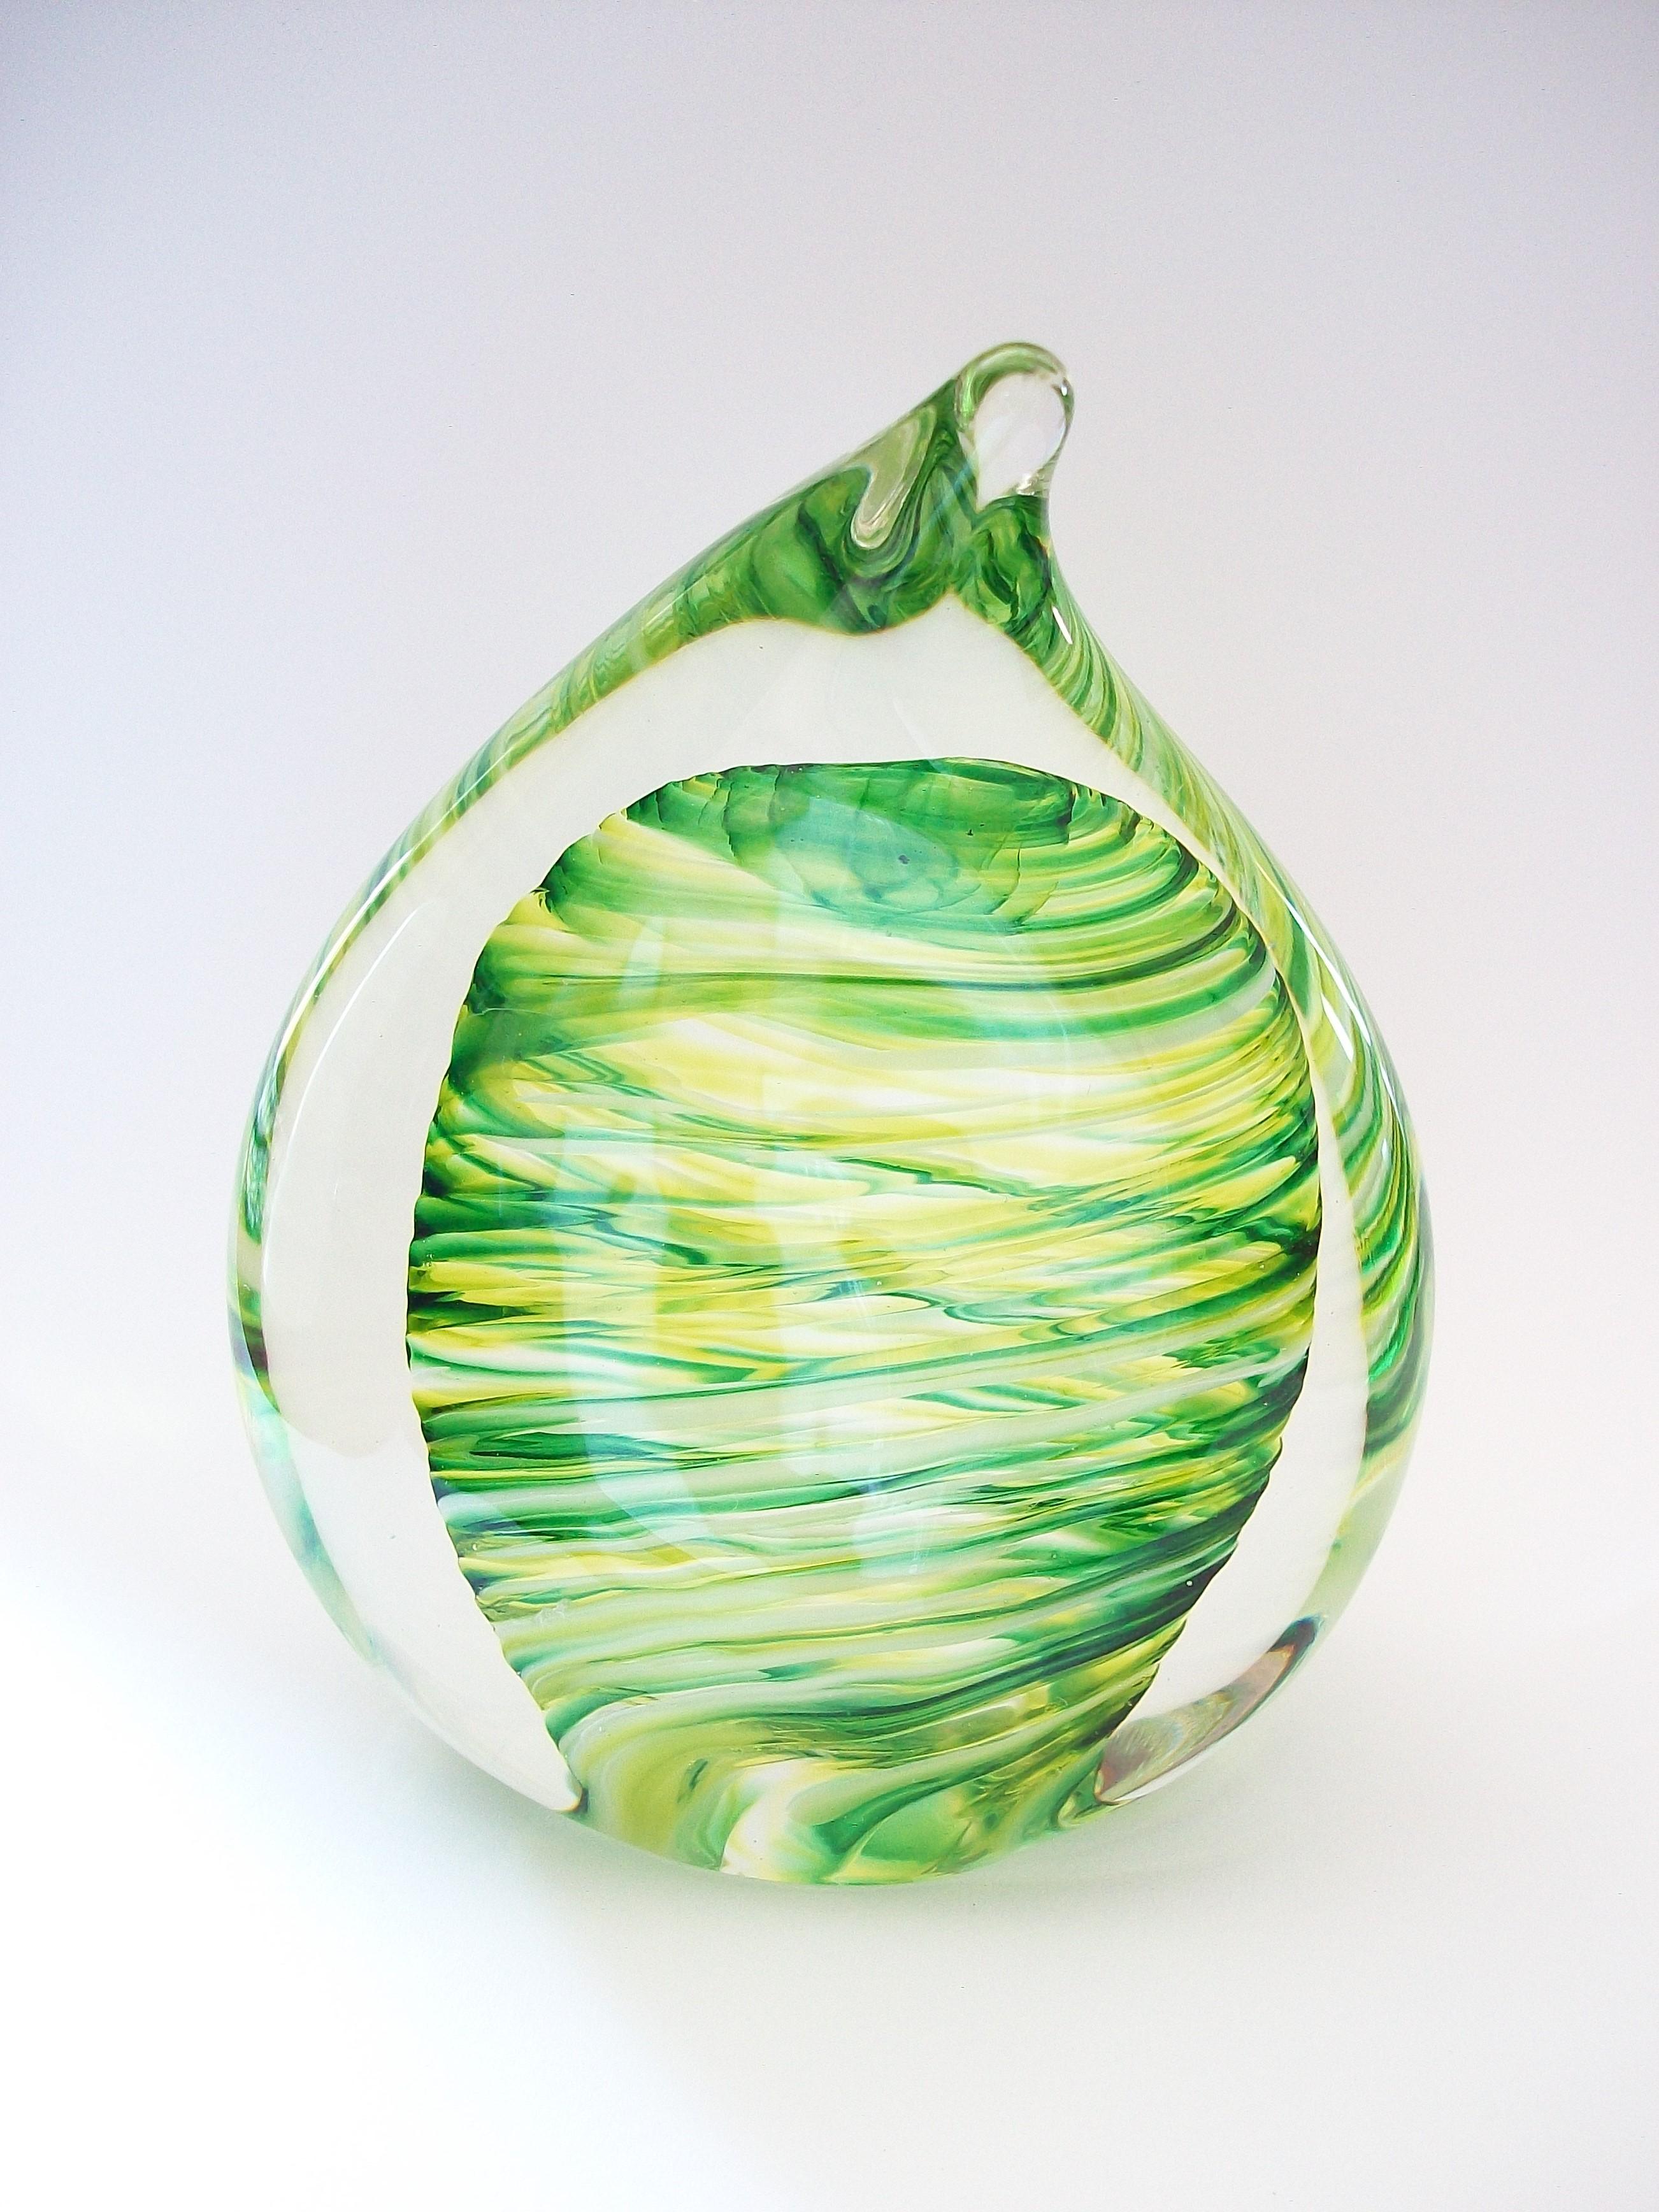 Contemporary studio glass 'teardrop' paperweight sculpture - hand made/mouth blown with striking green, white and yellow swirl center - indistinctly signed and dated on the base (unknown / unidentified maker) - Canada - circa 2012.

Excellent/mint